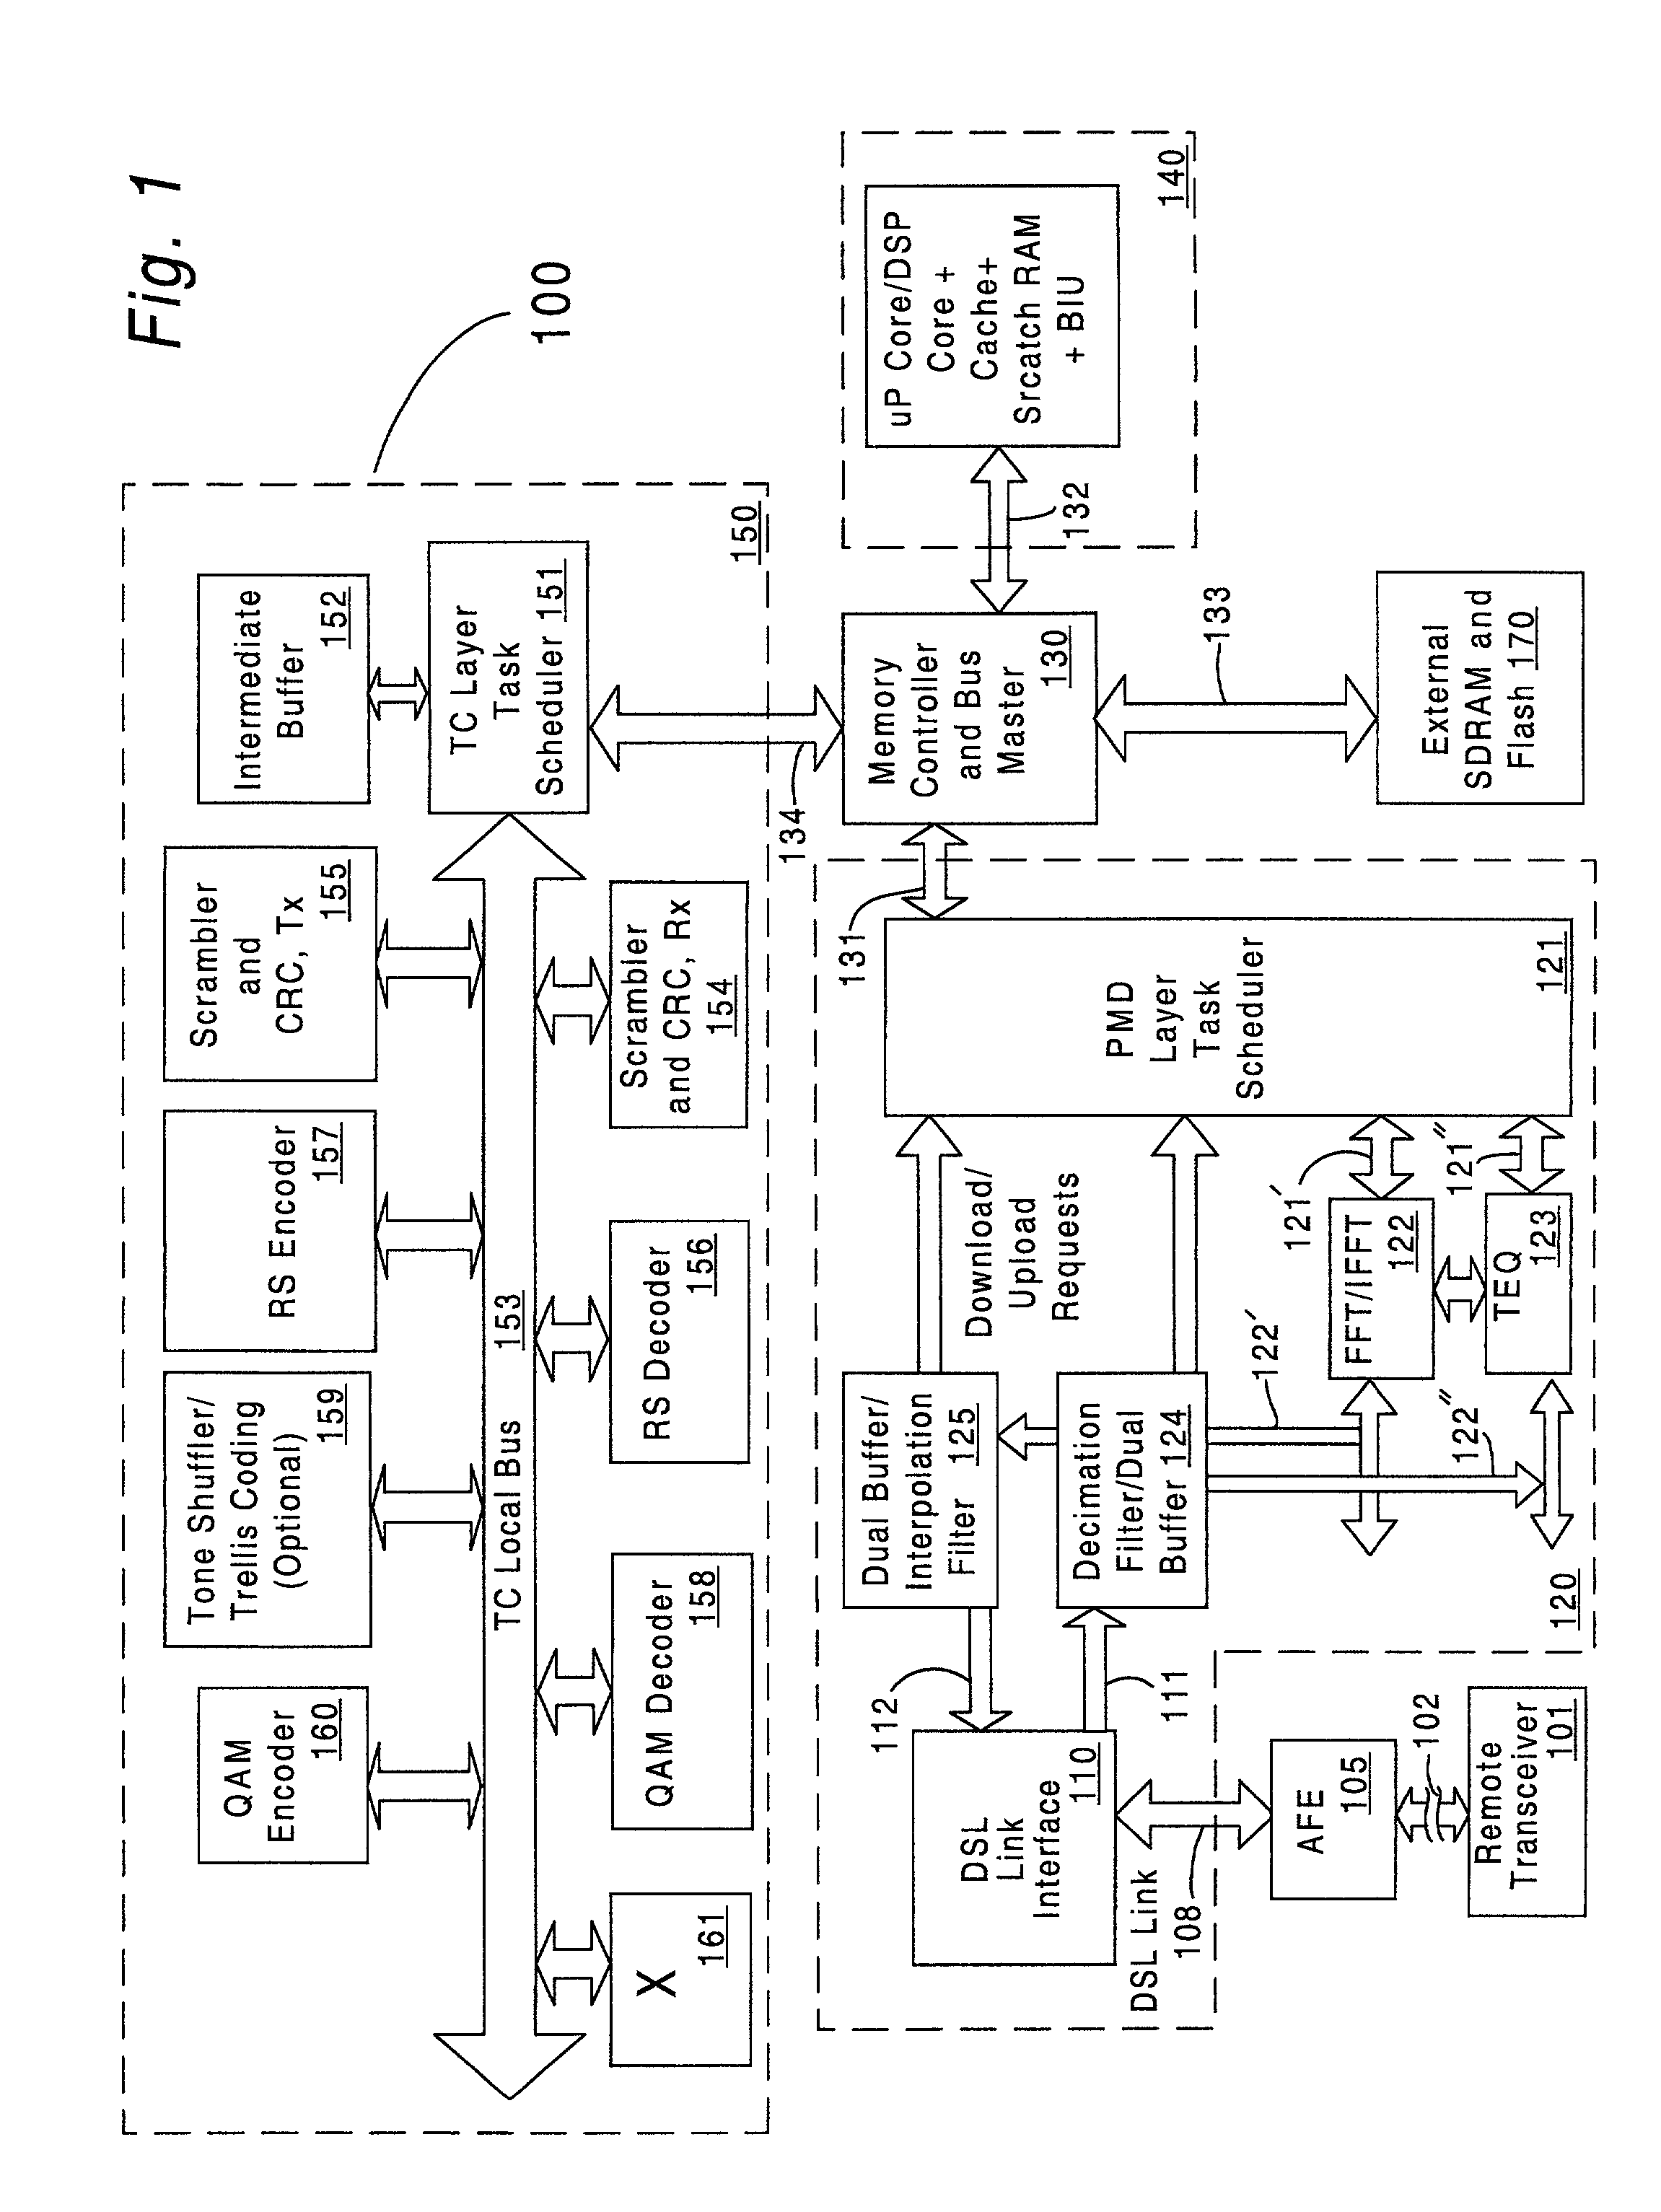 Physical medium dependent sub-system with shared resources for multiport xDSL system